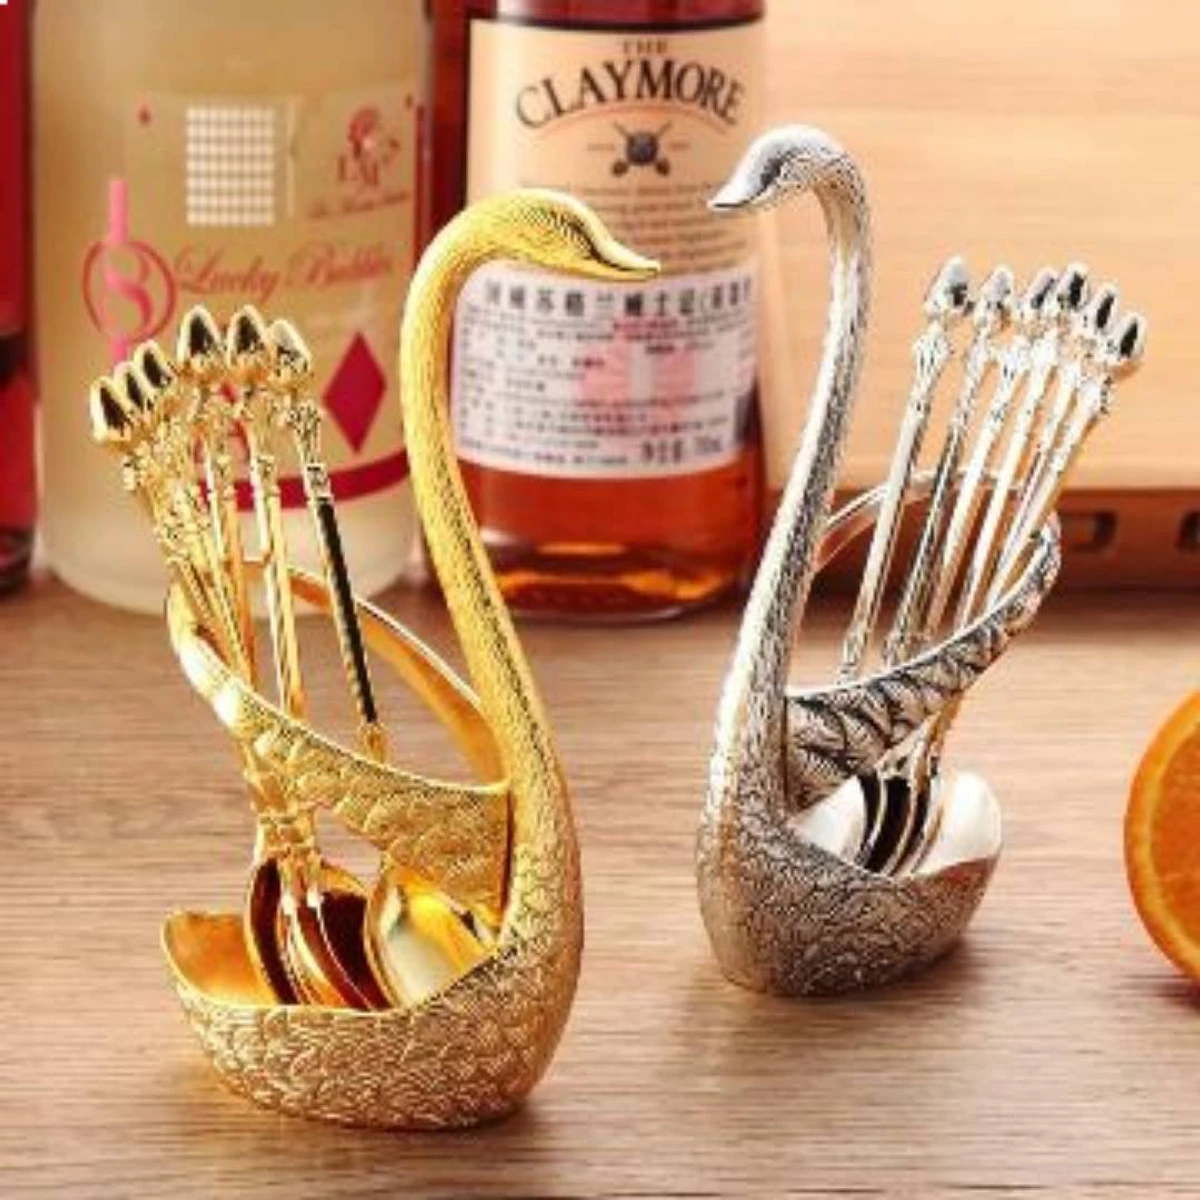 Best Spoon Set With Swan Stand Pattern Golden With 6 Spoons